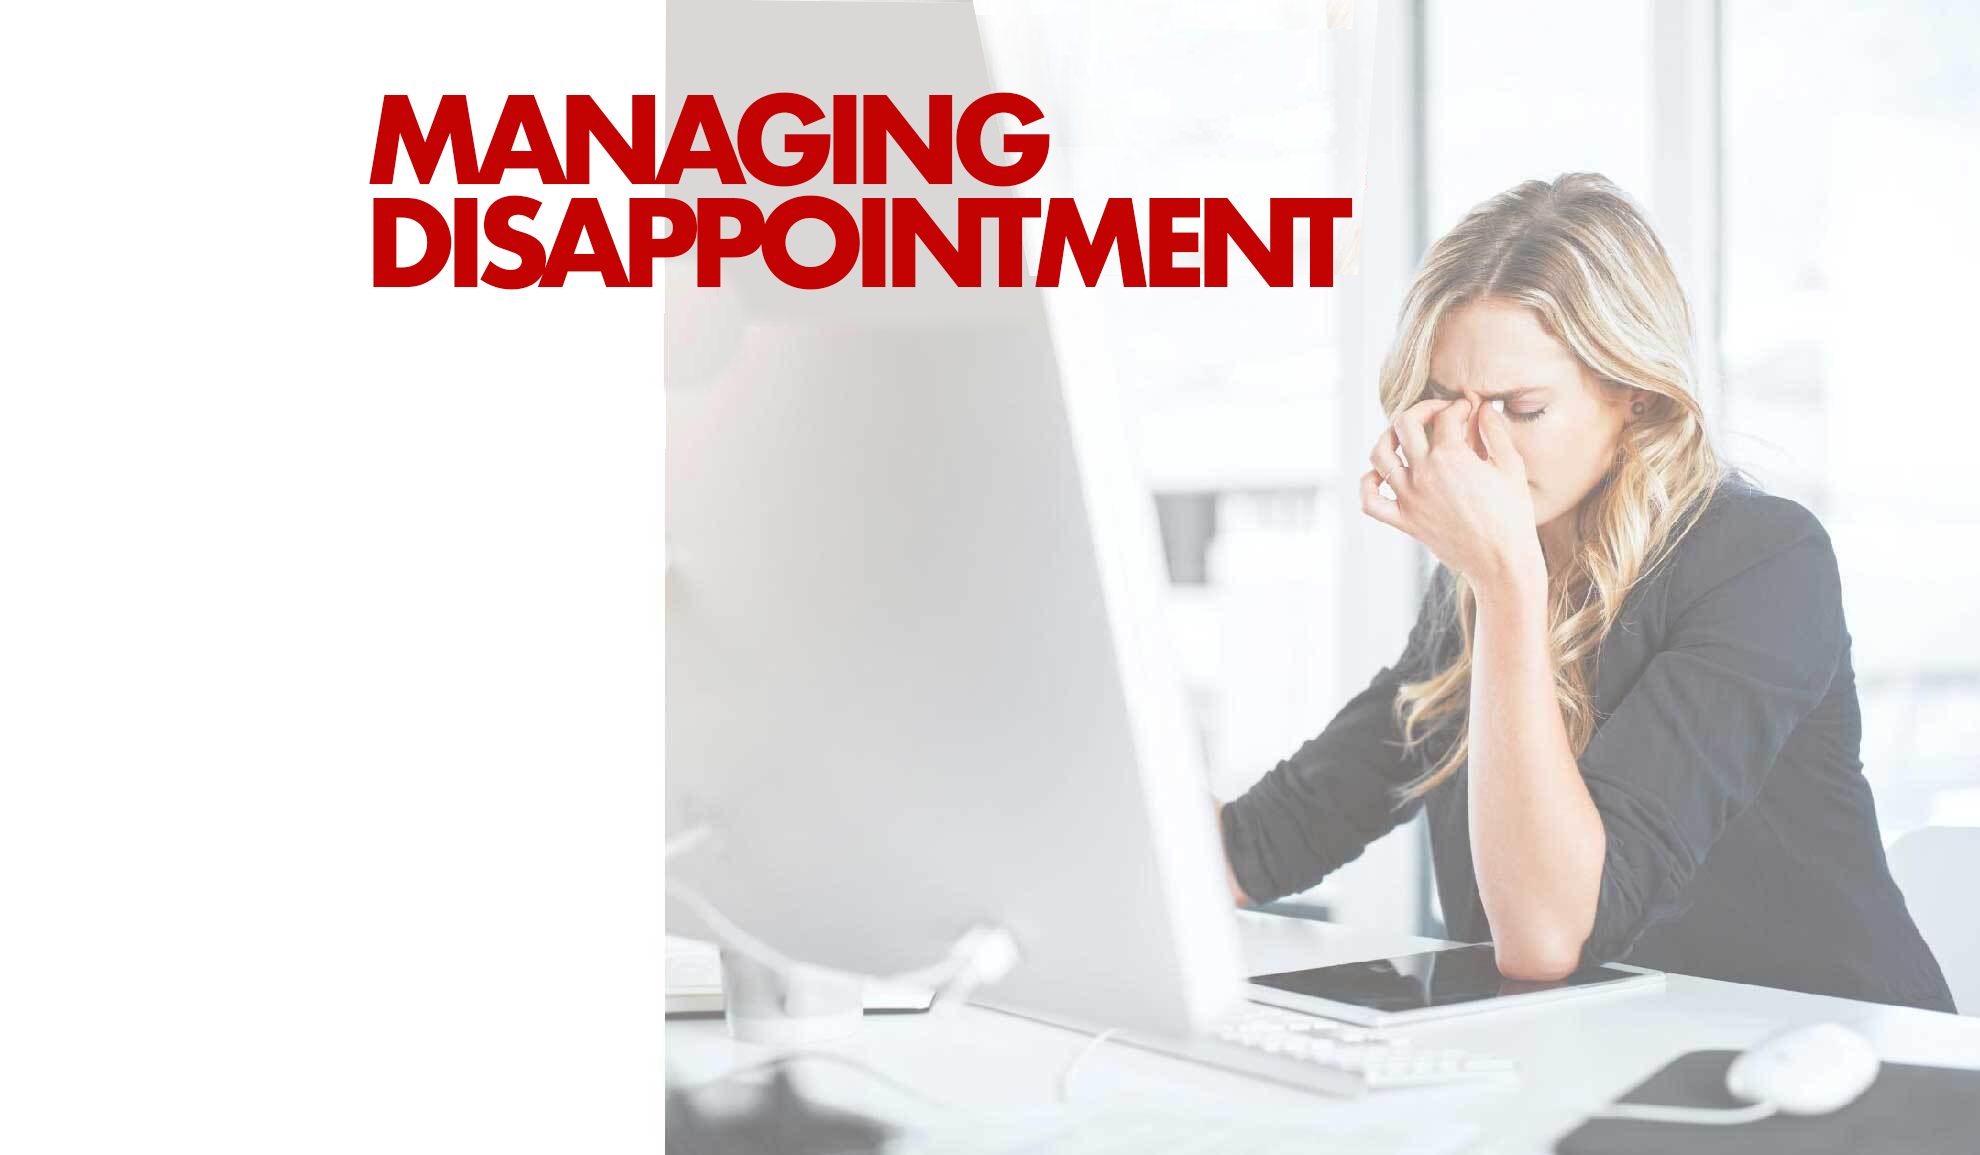 https://22566034.fs1.hubspotusercontent-na1.net/hubfs/22566034/managing-disappointments-2.png